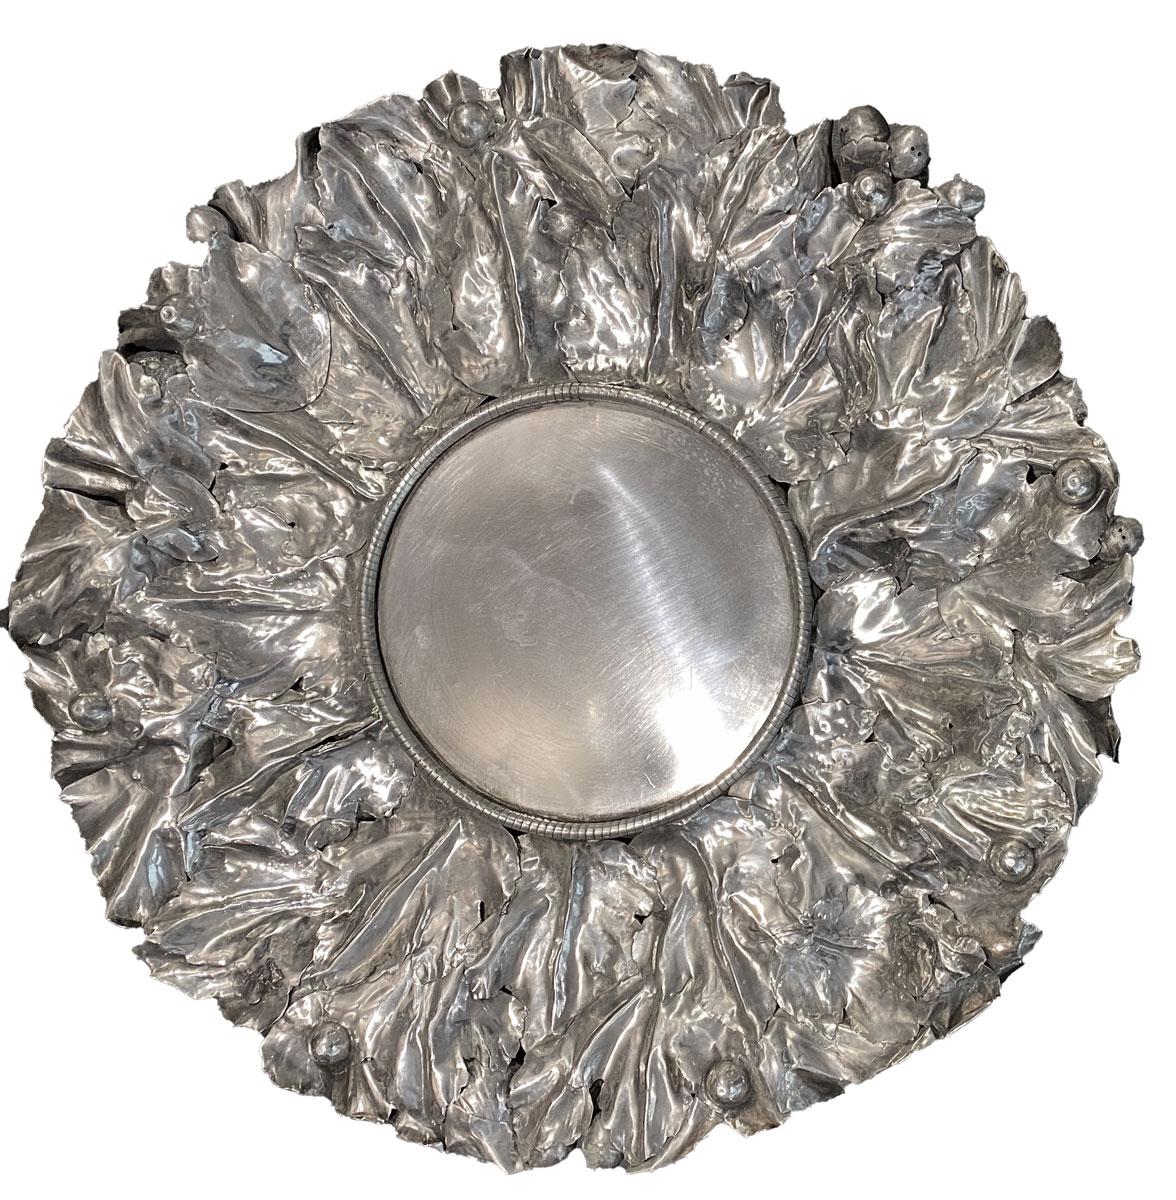 Italian Buccellati Fruits Wreath Centerpiece Solid Silver Produced Stamped by Lisi 1978 For Sale